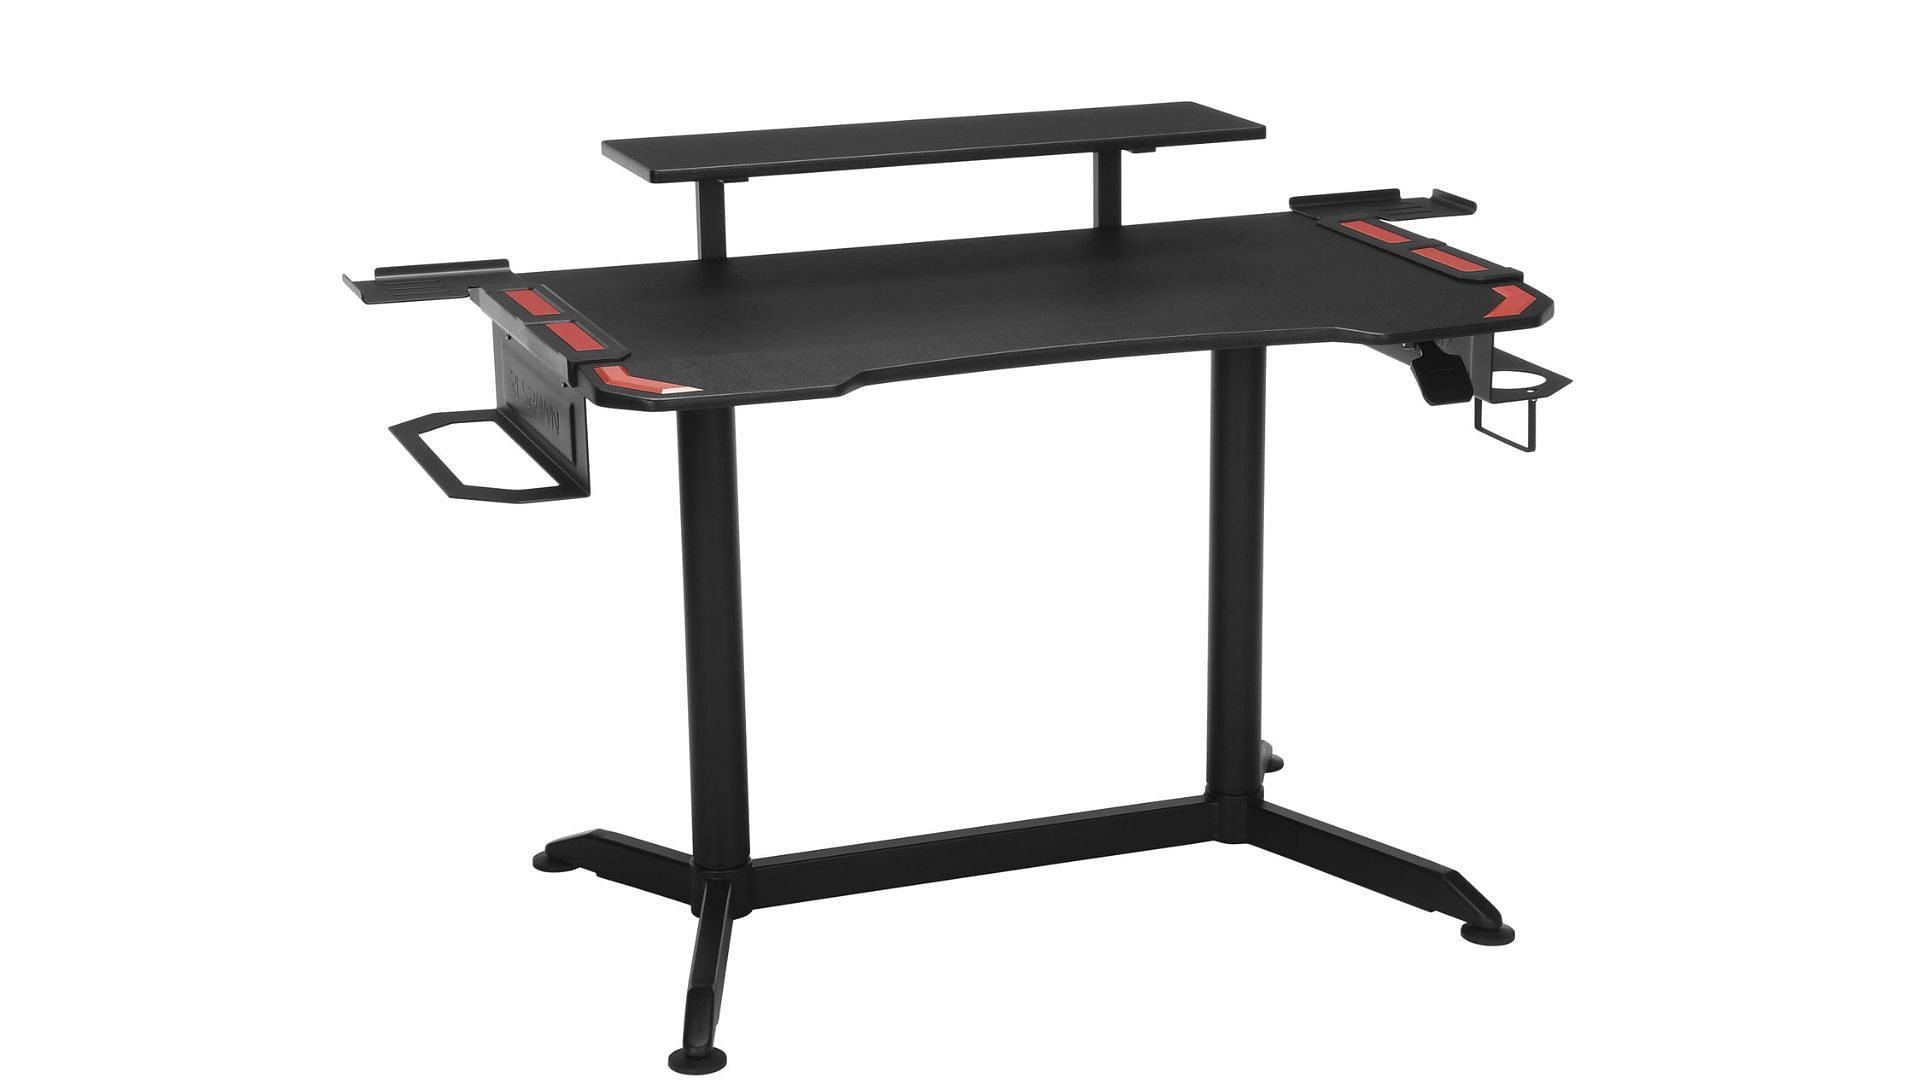 Fully loaded budget gaming desk (Image via RESPAWN/Amazon)